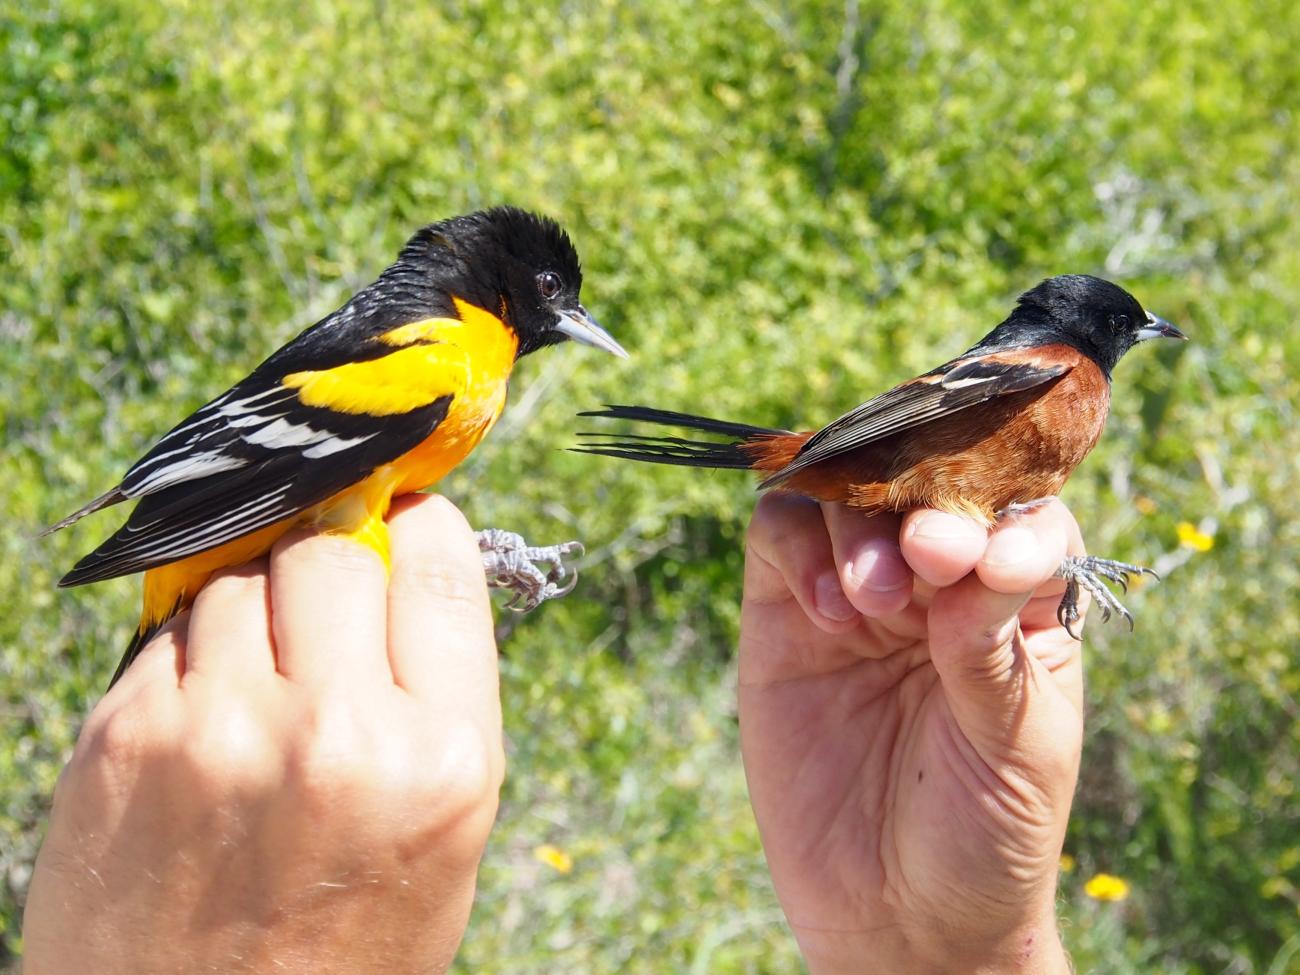 A Baltimore oriole and an orchard oriole in the hands of scientists